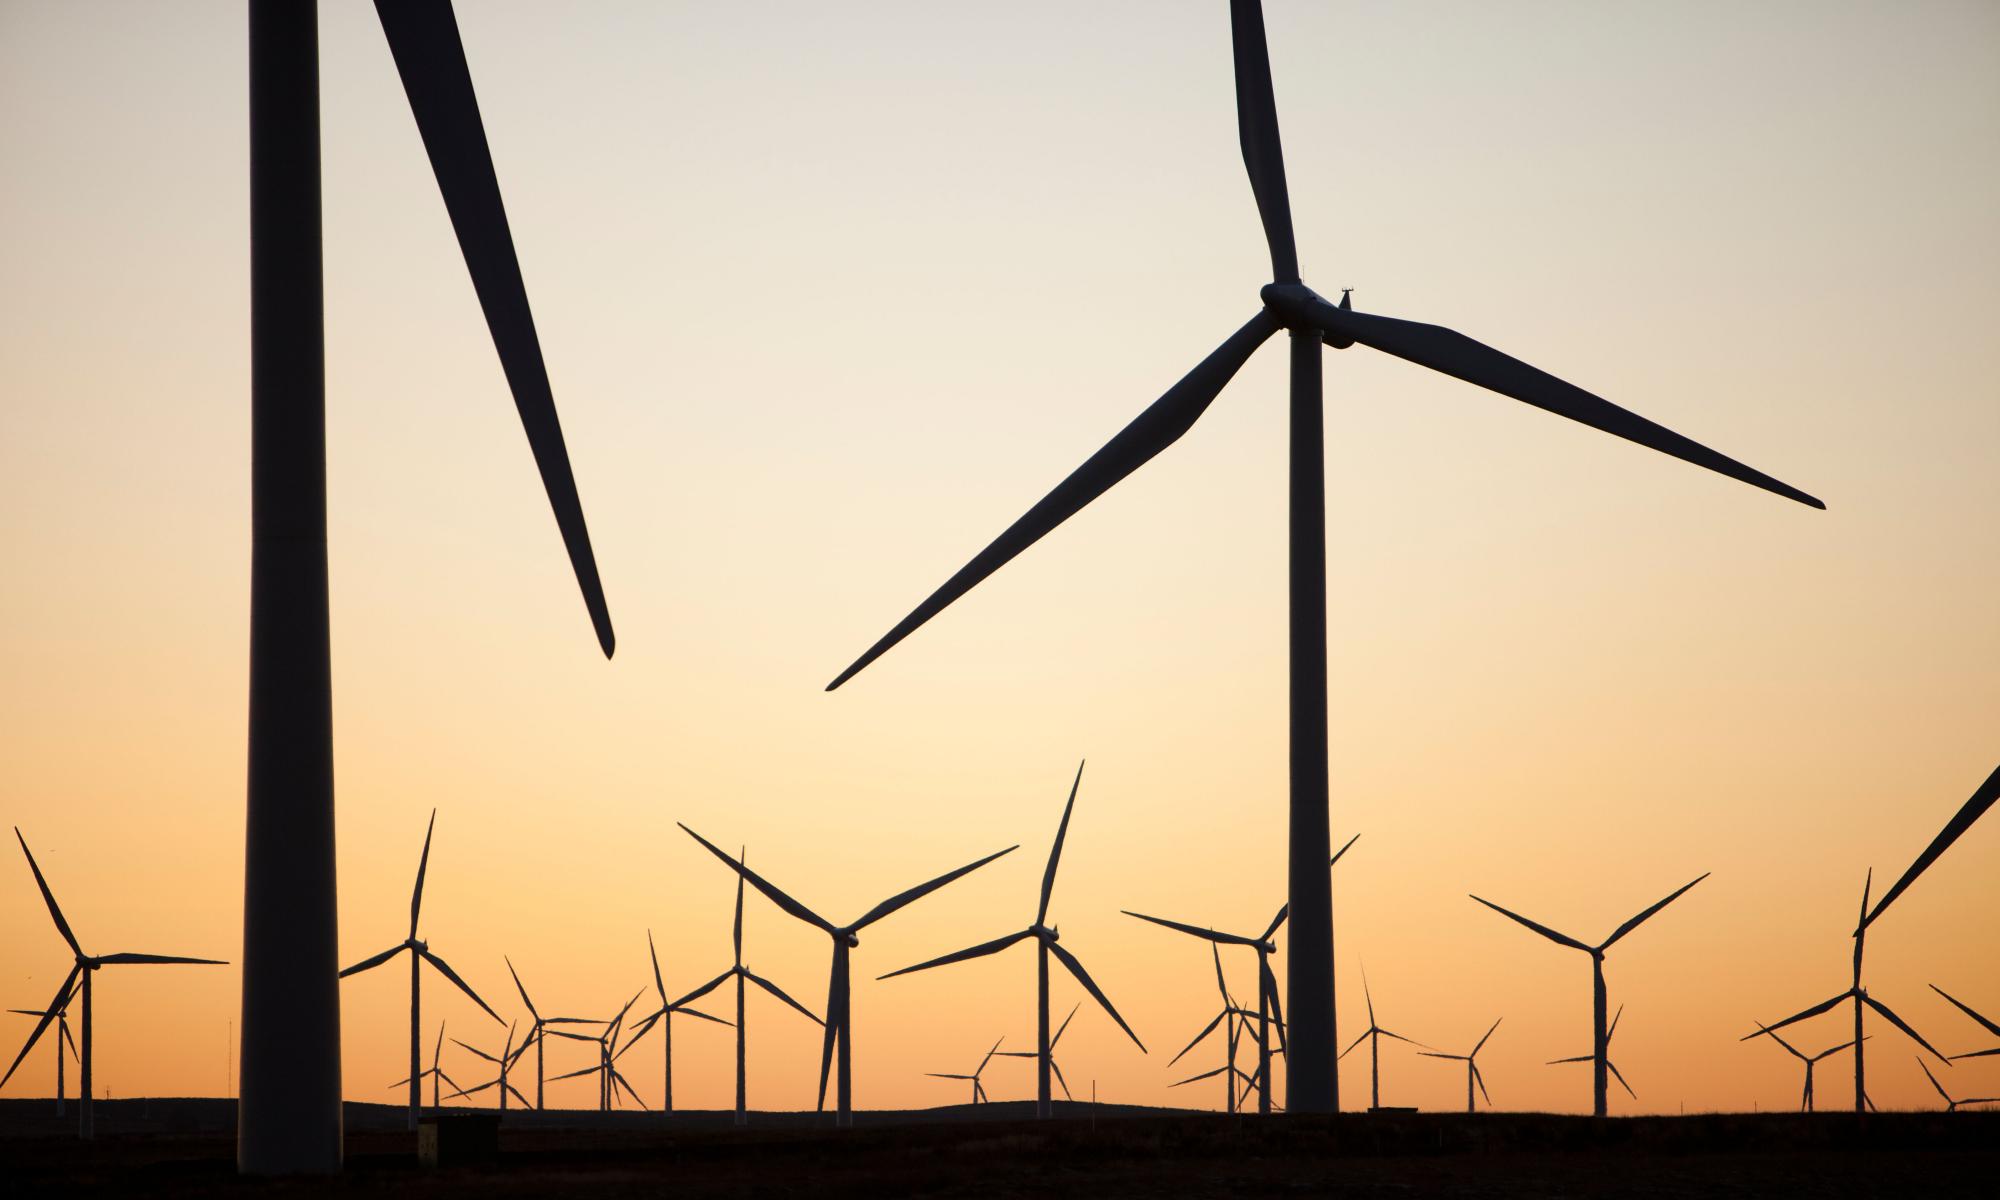 Mini-budget fell far short of promoting low-carbon future for UK